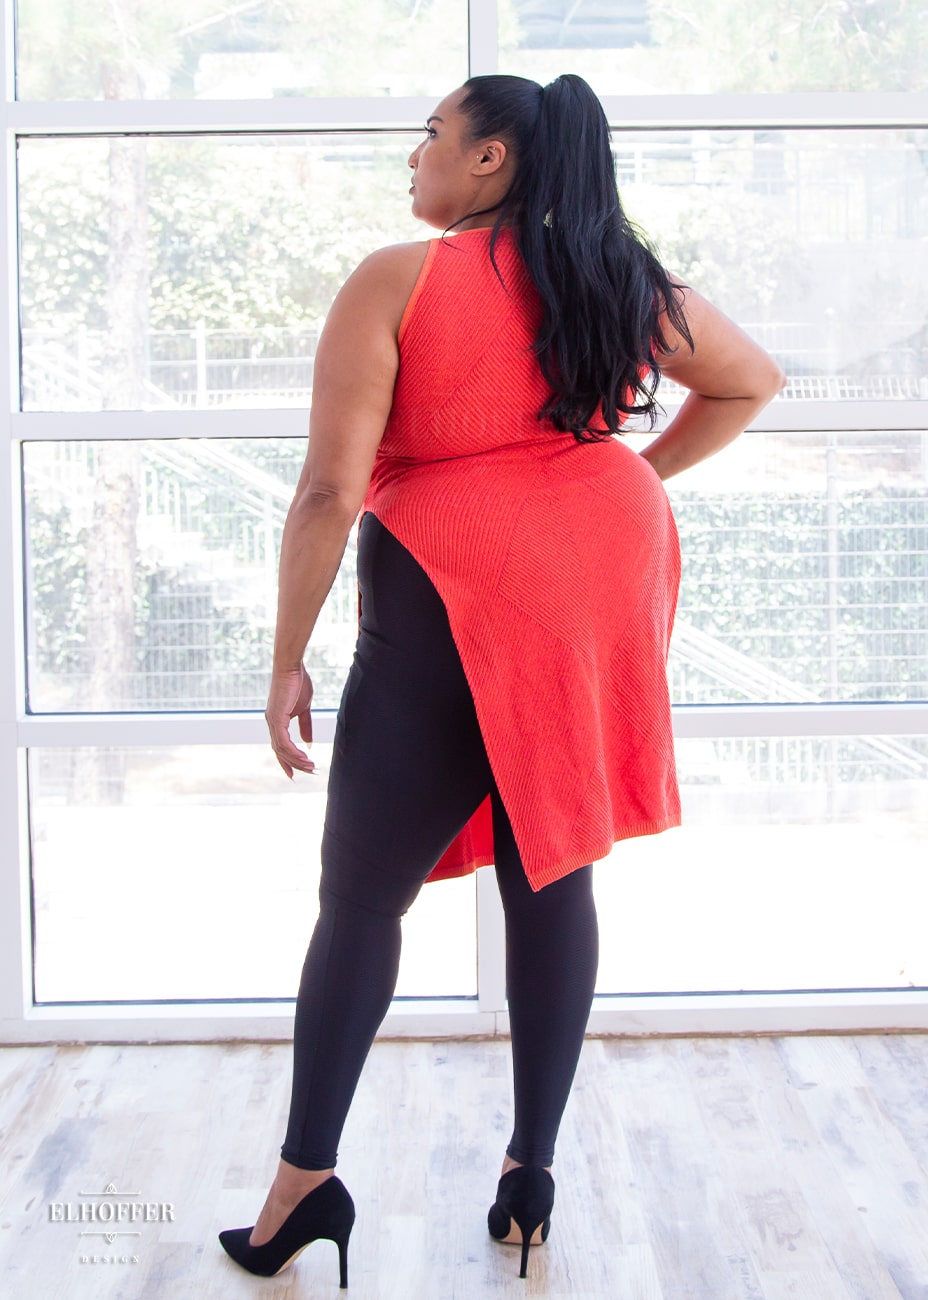 Tas is modeling the size 2XL. She has a 51” Bust, 39.5” Waist, 52” Hips, and is 5’6”.